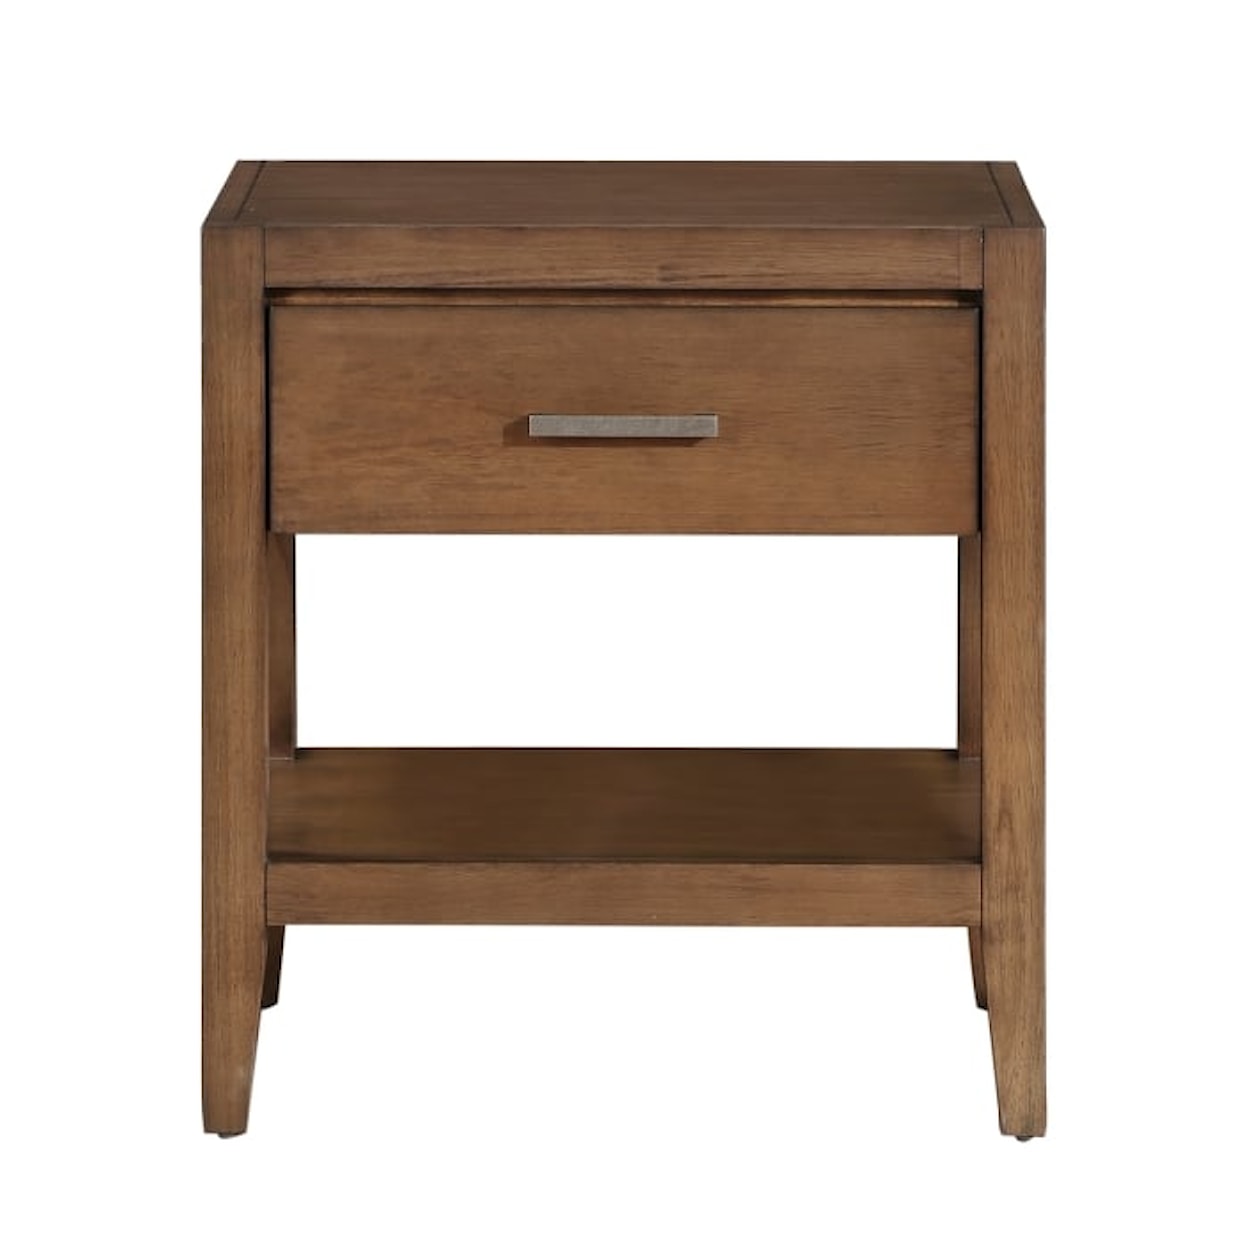 Homelegance Miscellaneous Nightstand